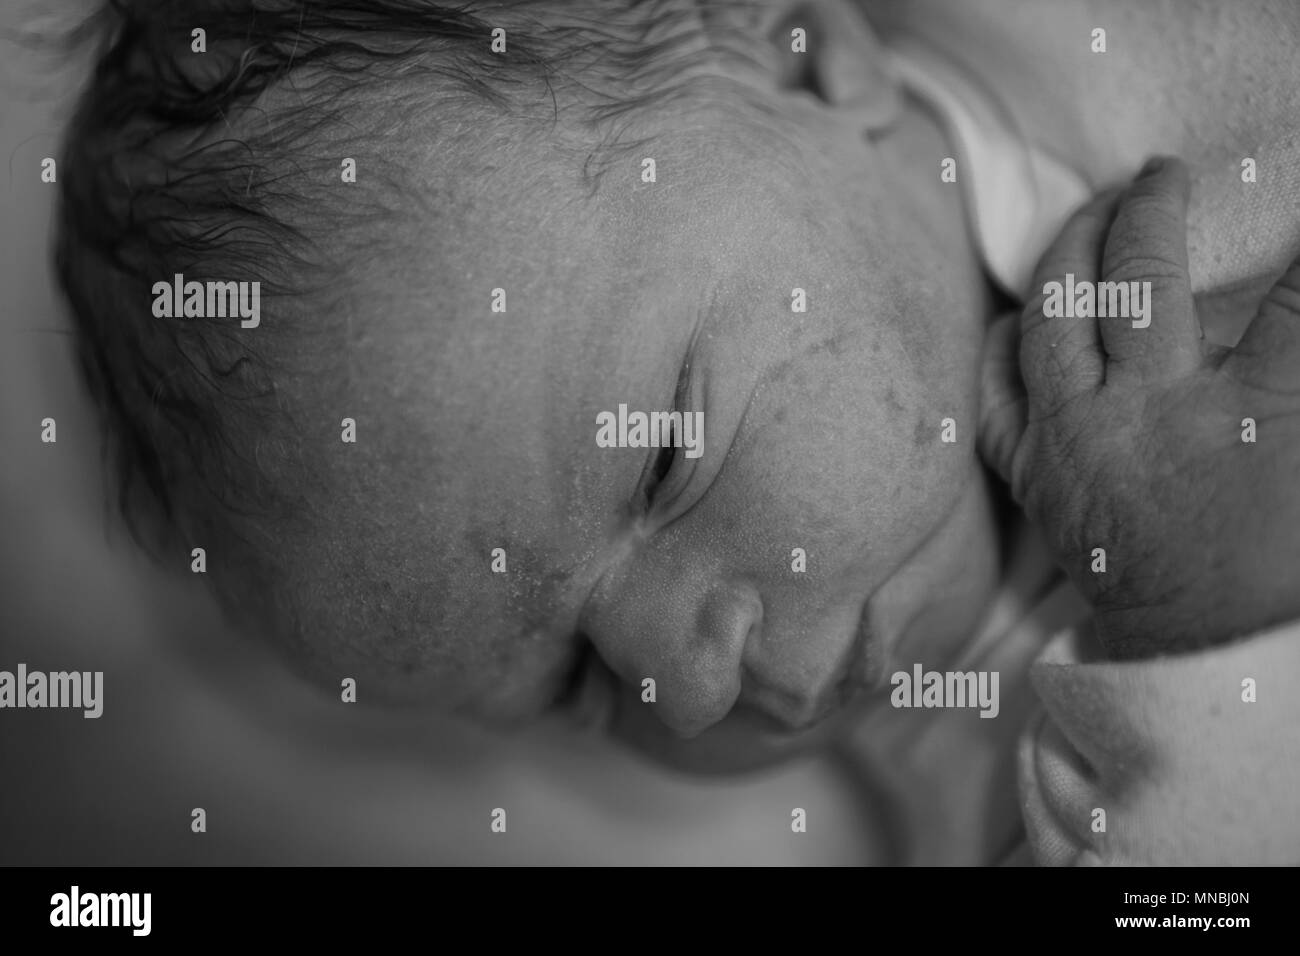 Newborn baby, two hours after birth Stock Photo